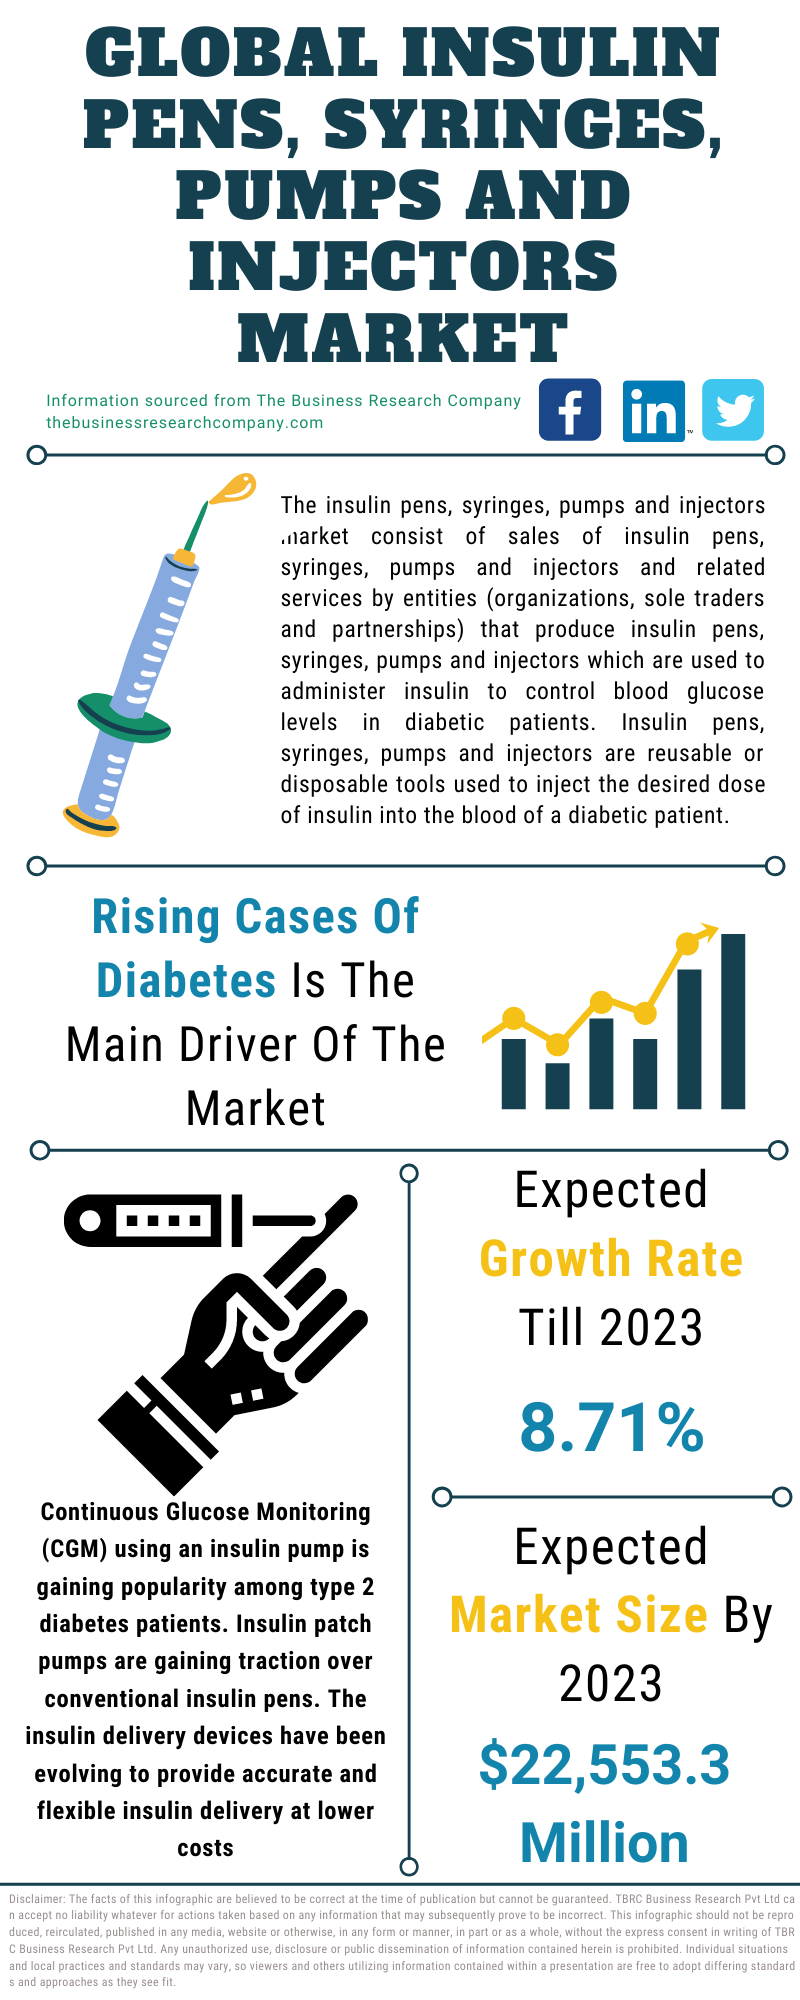 Oswald Eksamensbevis skrot Global Insulin Pens, Syringes, Pumps And Injectors Market Trends,  Strategies, And Opportunities In The Market 2021-2030 - Techtoday Newspaper